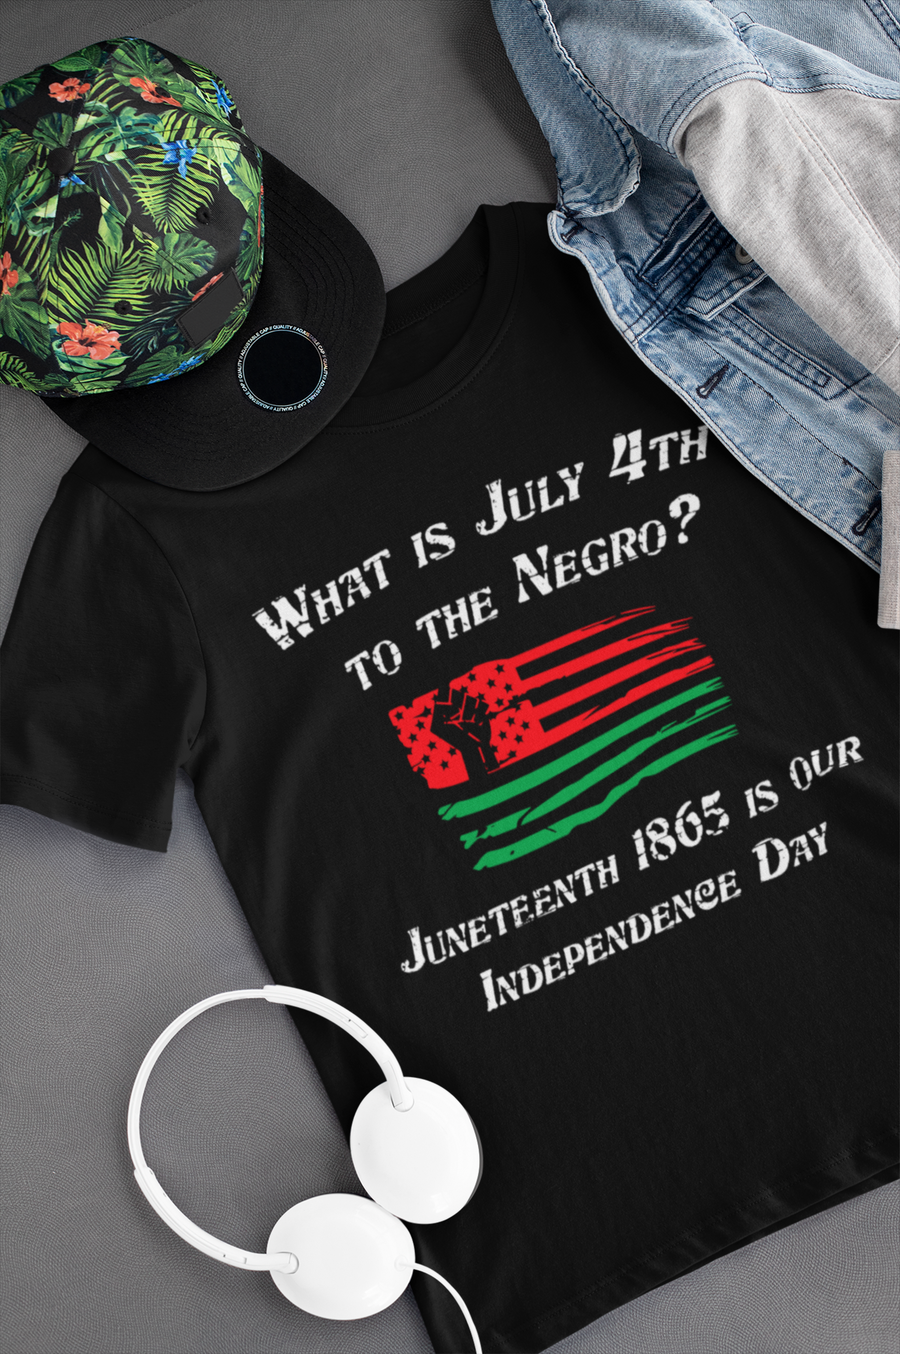 Frederick Douglass "What is July 4th?" Commemoration Tee - Gum Clothing Store